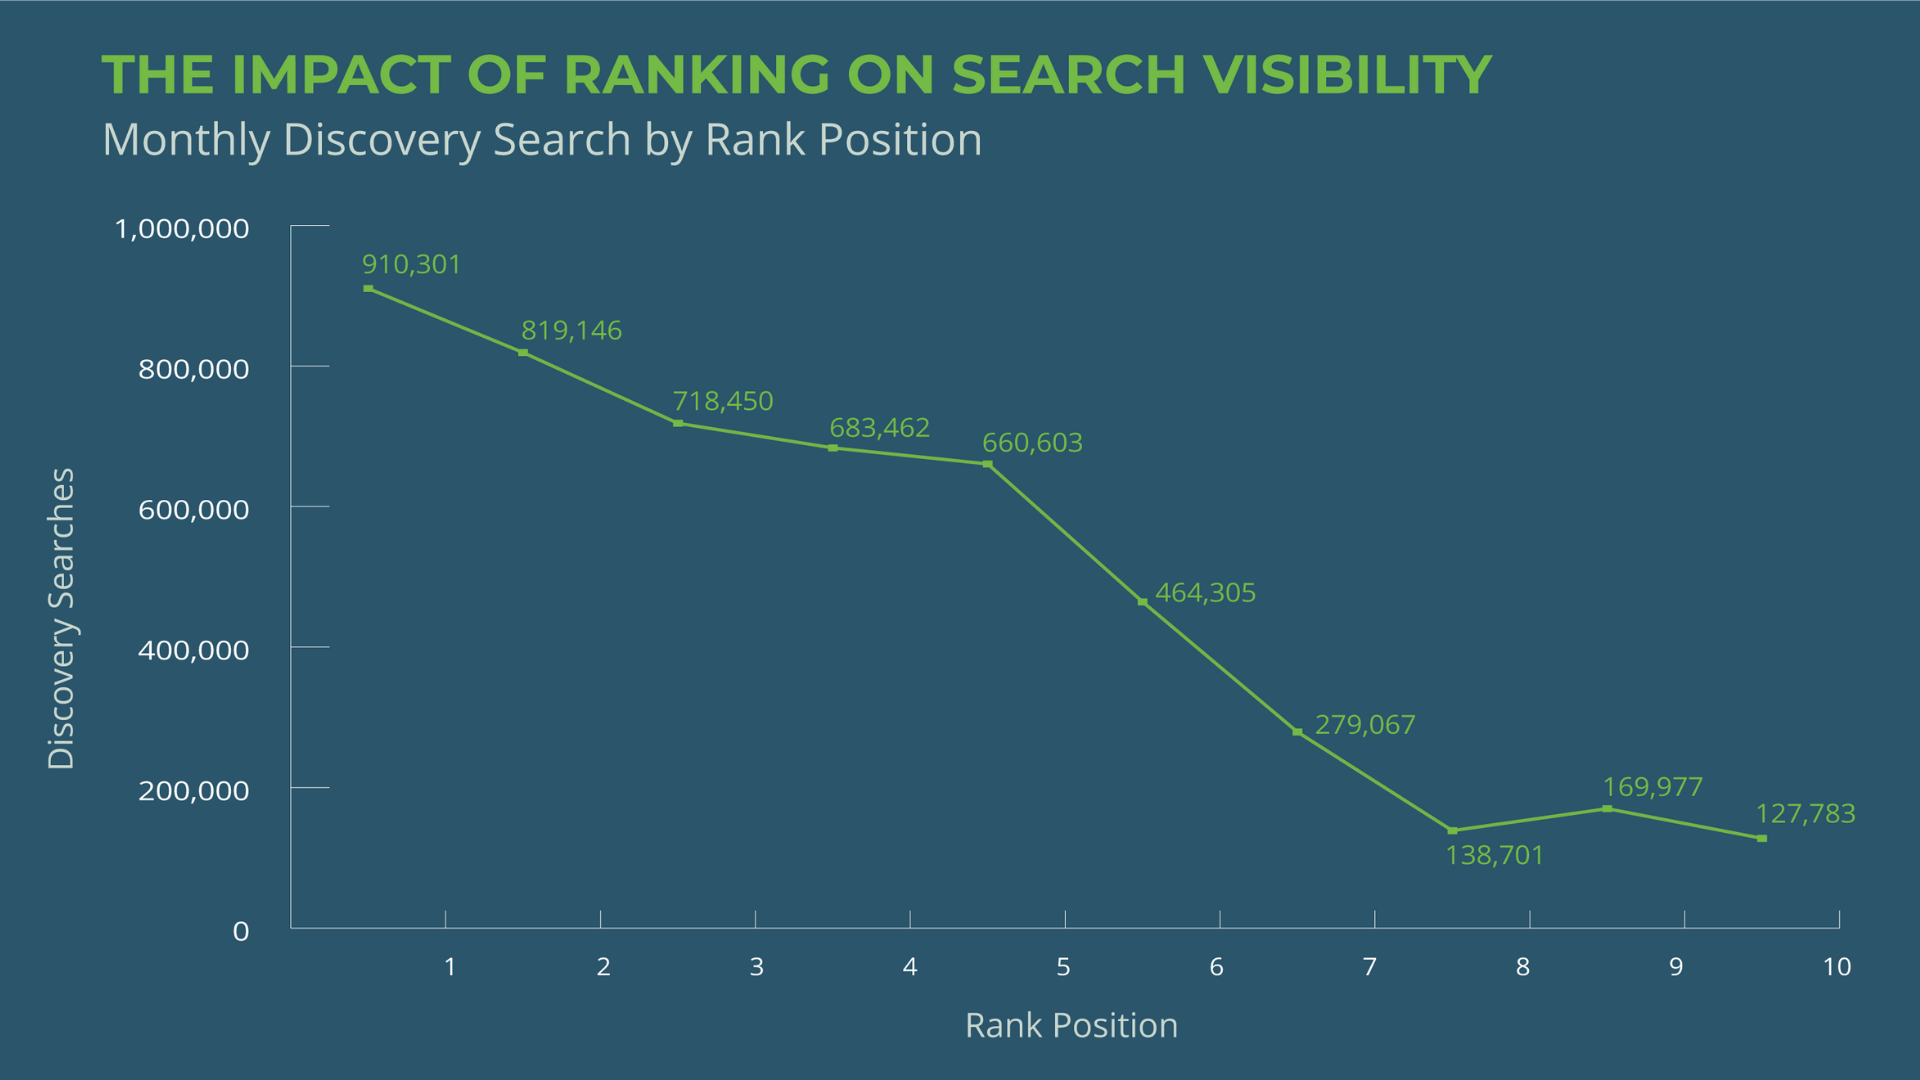 Blue background graph with a green line showing a direct relationship between rank position on axis x and discovery searches on axis y